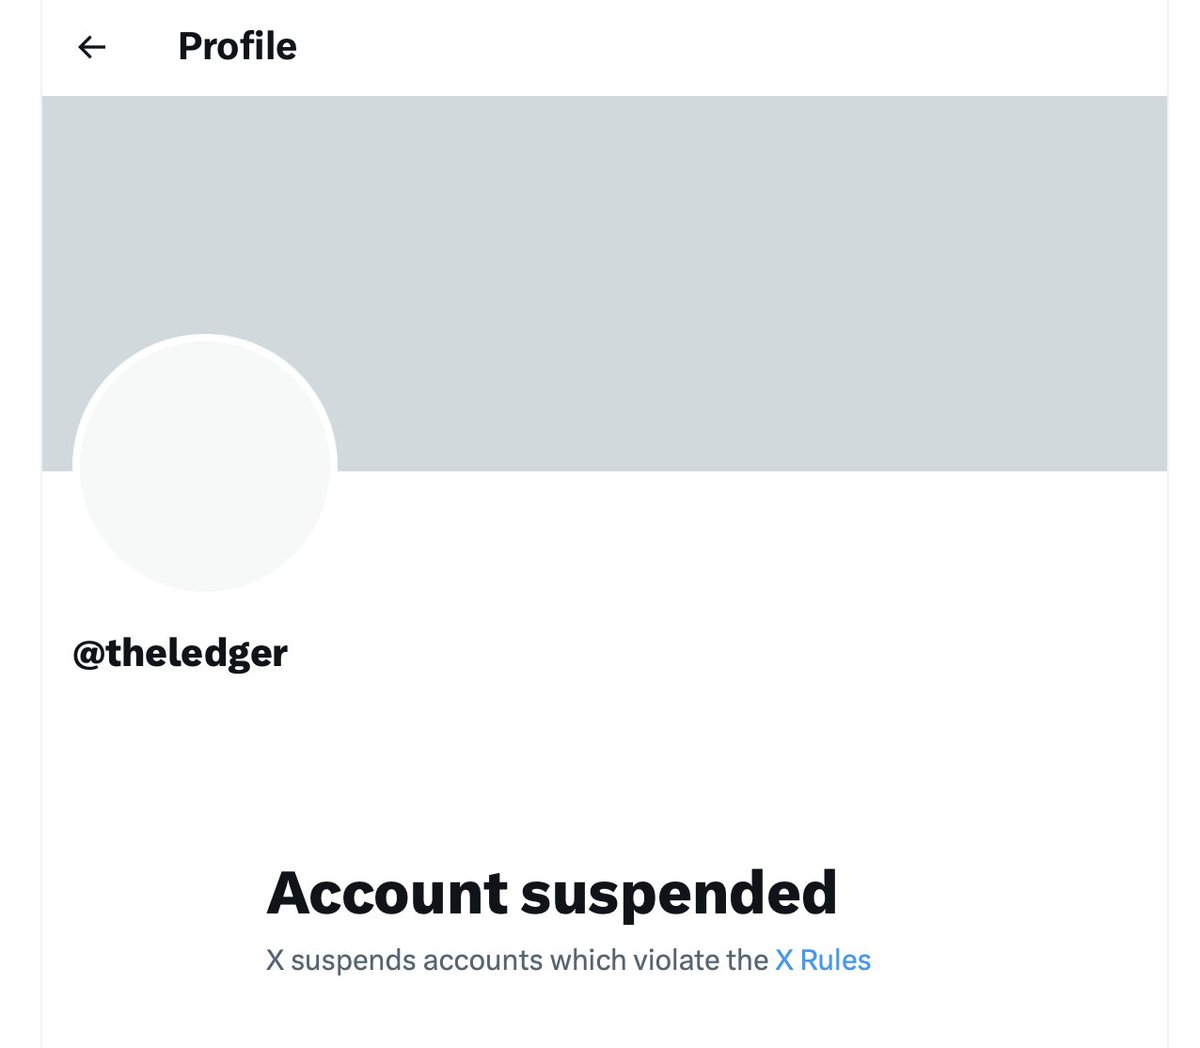 Hmmm ... the Lakeland Ledger's X account is suspended. What could it have possibly done to warrant that? cc: @garywhite13